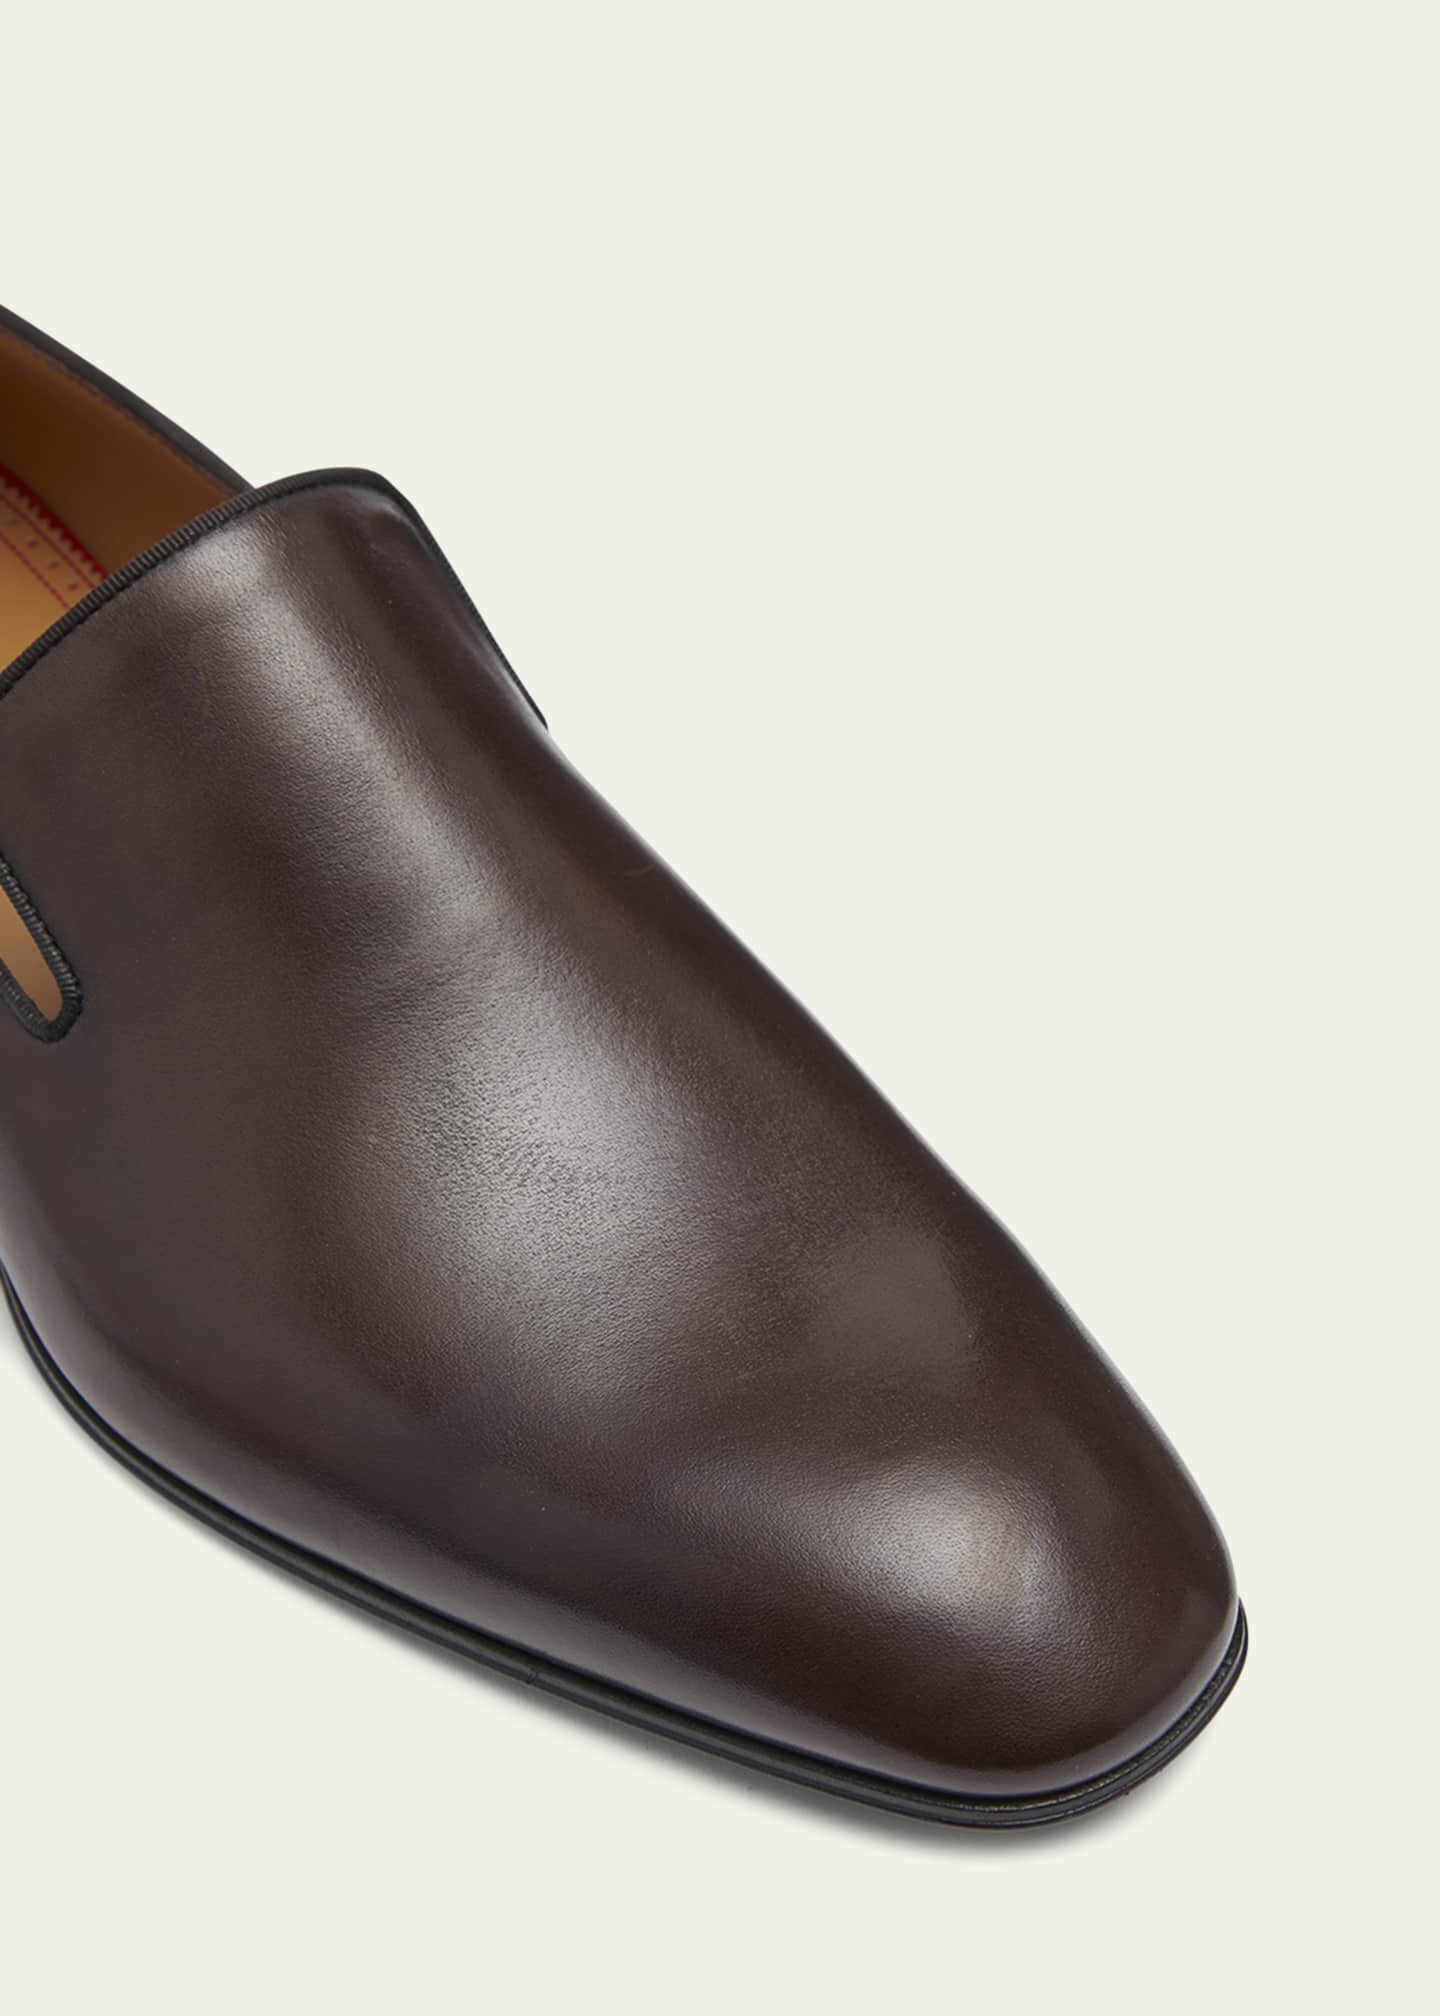 LOUBOUTIN, CHRISTIAN Brown Loafers for Men